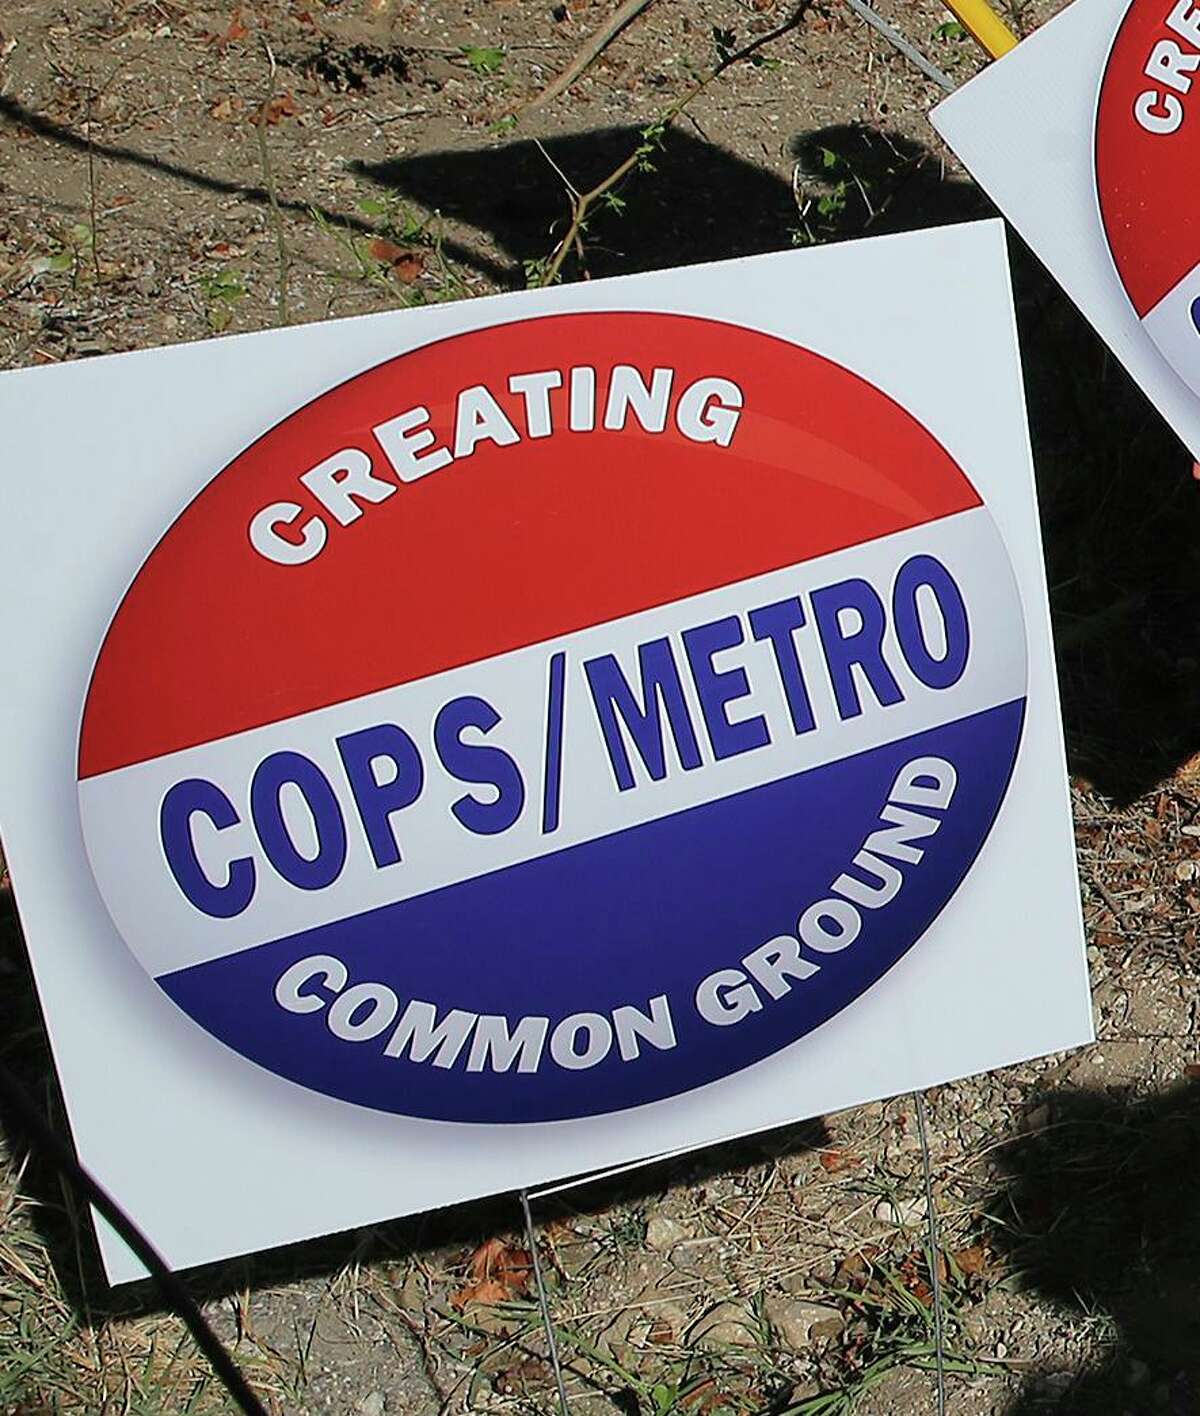 COPS/Metro leaders worry the city hasn’t done enough to prepare for the next stage of its training efforts — Ready to Work, the $200 million program backed by a sales tax that will also help residents enroll in college degree programs. Already, the program’s rollout has been pushed back a month from September to October.